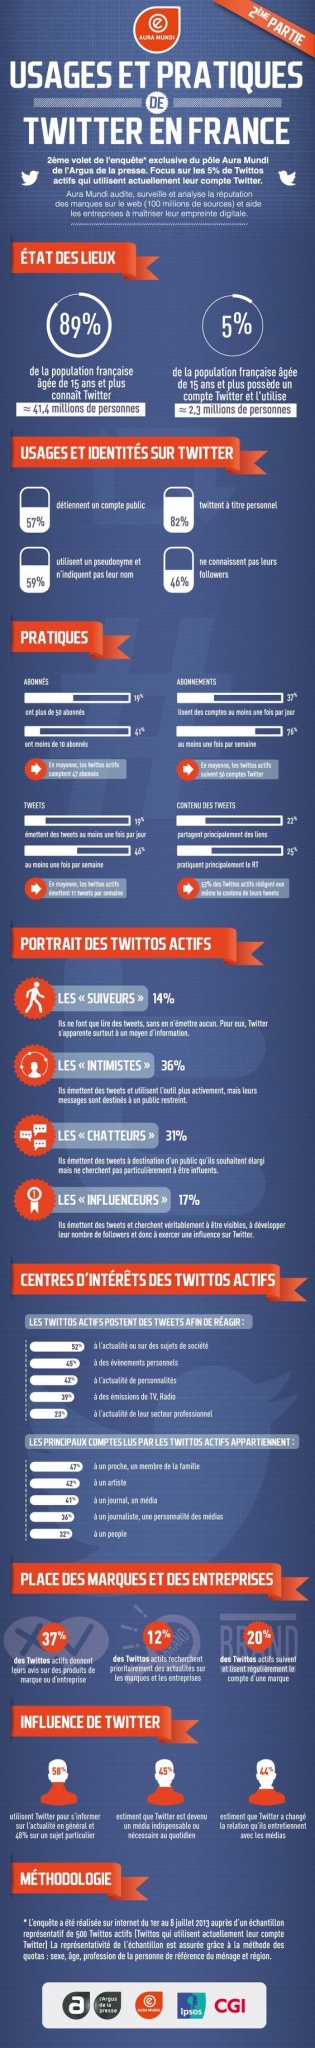 twitter-france-infographie